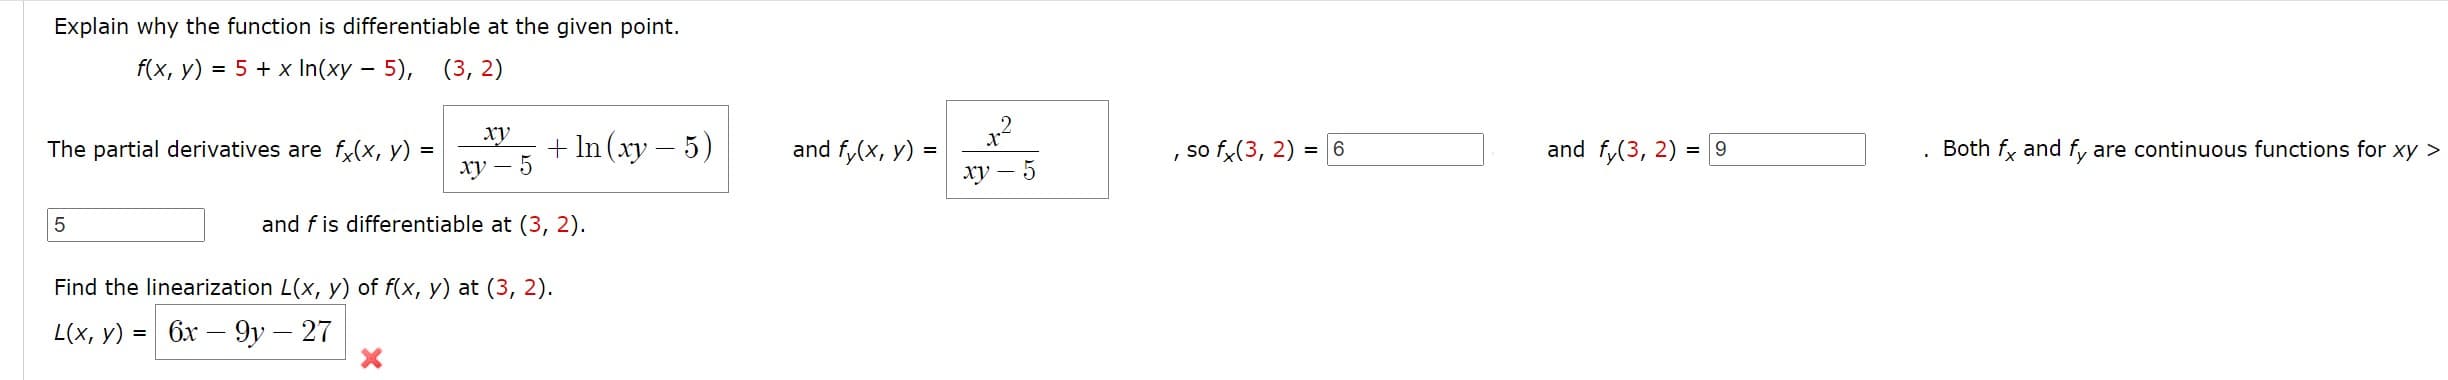 Explain why the function is differentiable at the given point.
f(x, y) = 5 + x In(xy – 5), (3, 2)
xy
The partial derivatives are f(x, y) =
+ In (xy – 5)
and f,(x, y) =
so f,(3, 2) = 6
and f,(3, 2) = 9
Both fy and f, are continuous functions for xy >
Xy - 5
ху — 5
5
and f is differentiable at (3, 2).
Find the linearization L(x, y) of f(x, y) at (3, 2).
L(x, у) %3D
бх — 9у — 27
